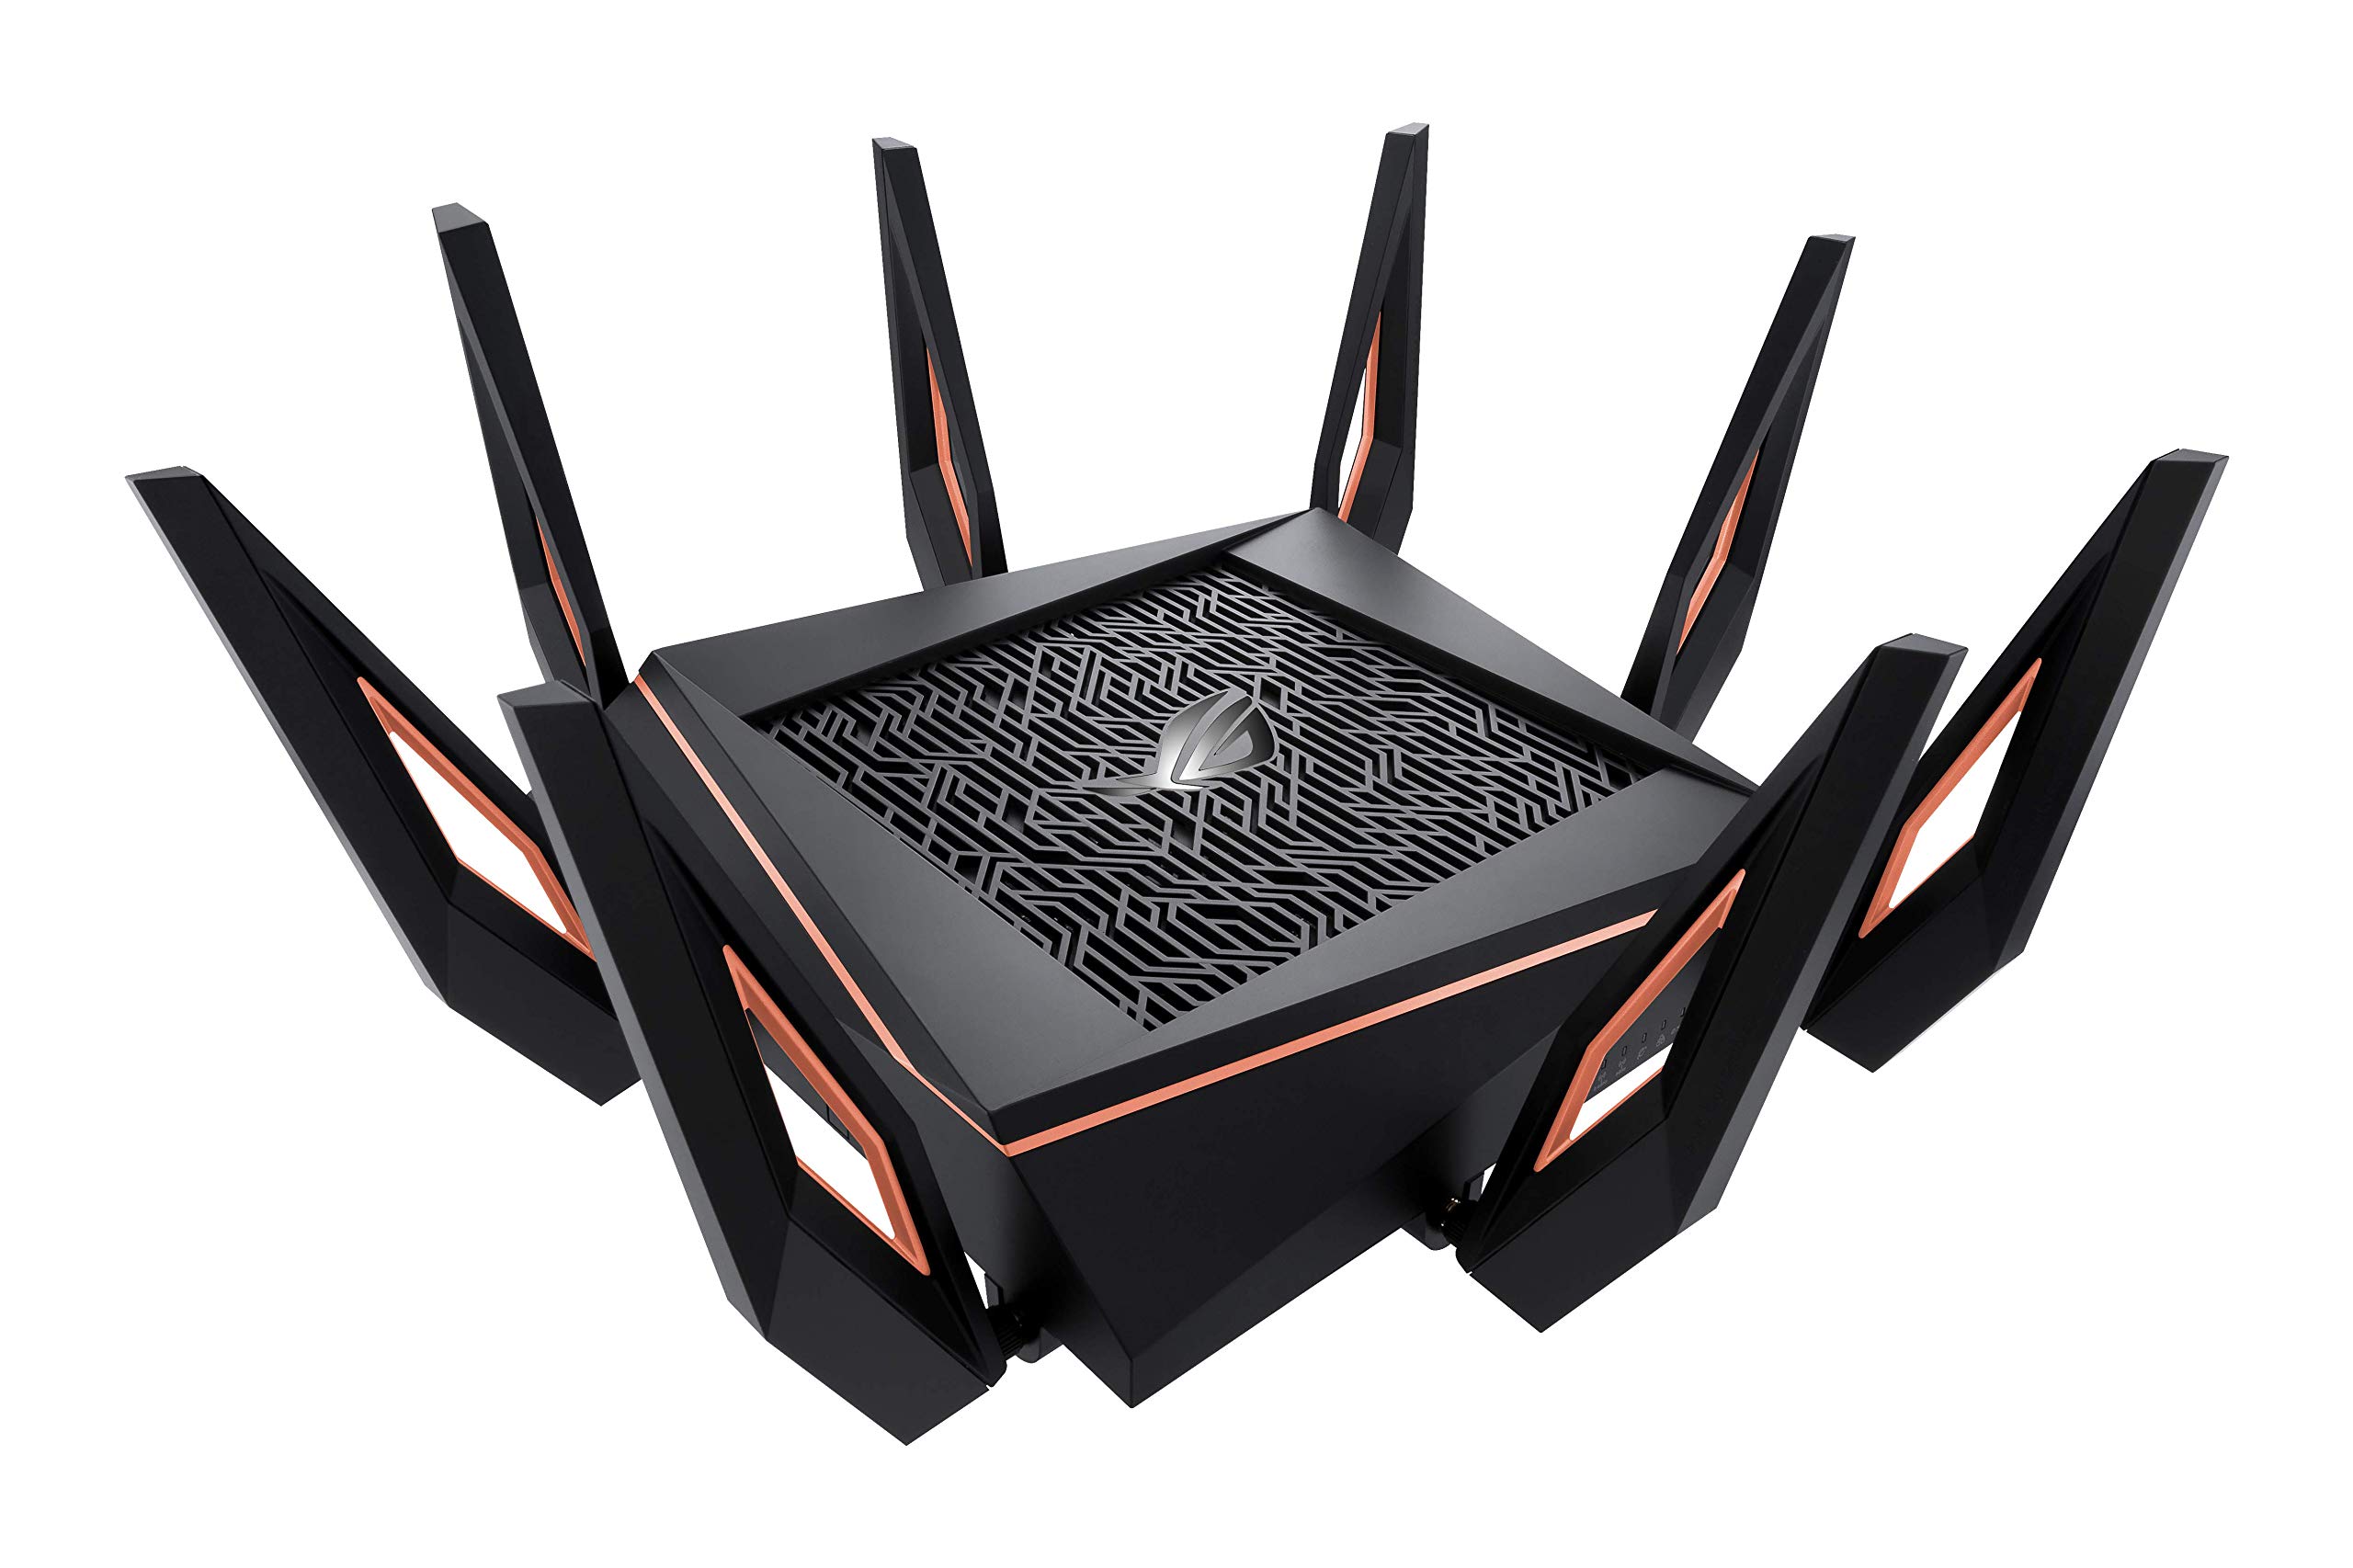 Choose the right server: Select the Overwatch server with the lowest ping to ensure a smoother gaming experience.
Enable game mode on your router: Some routers have a built-in game mode feature that prioritizes network traffic for gaming, reducing latency and improving overall performance.